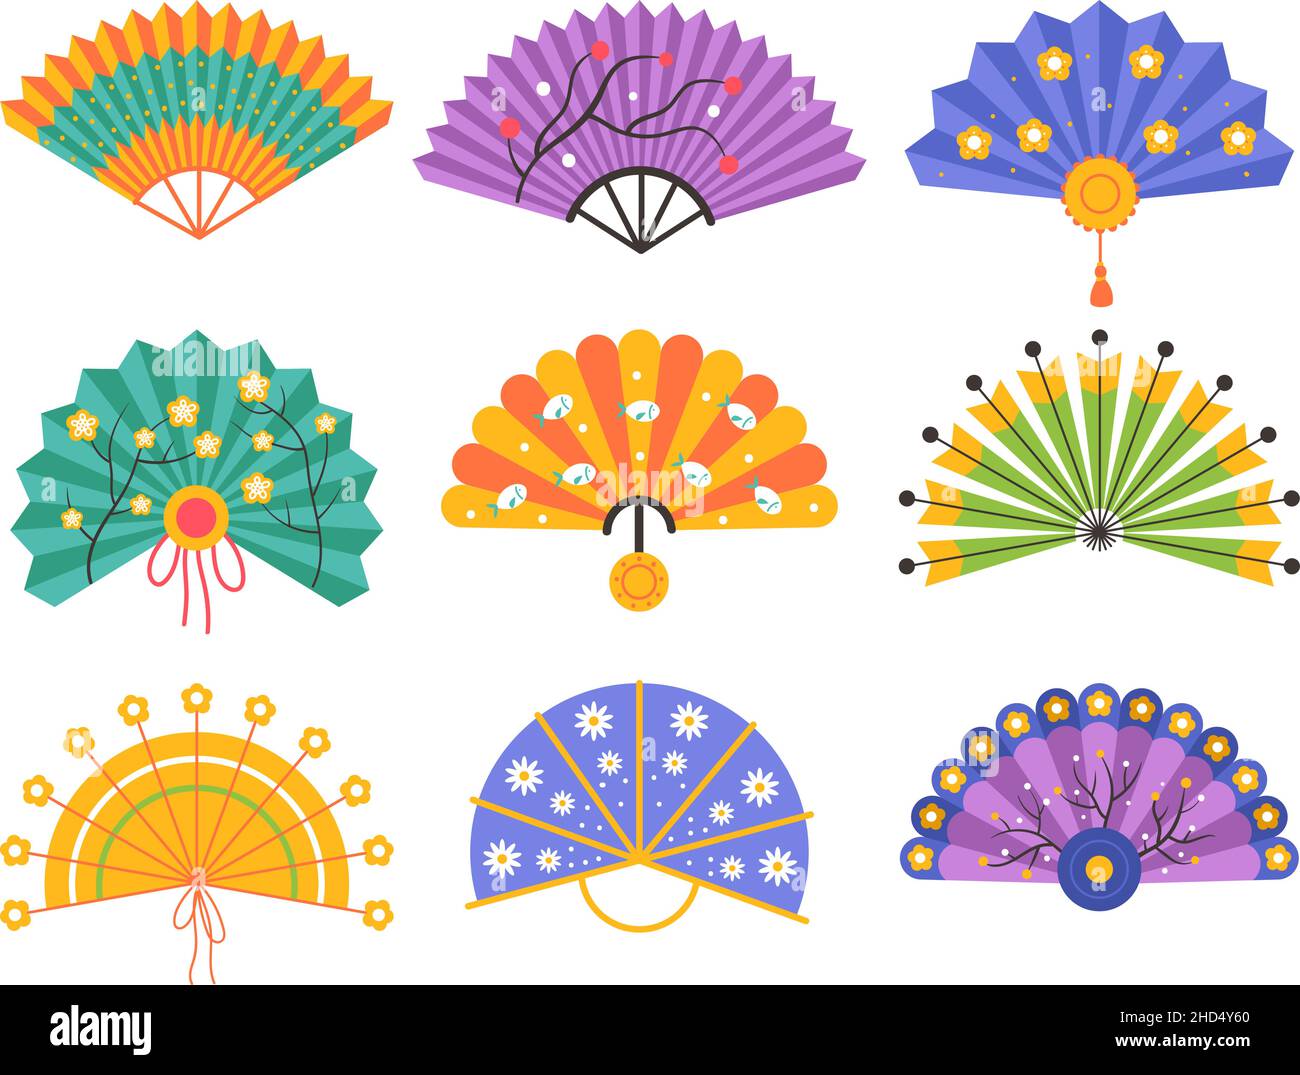 chinese hand fan clipart